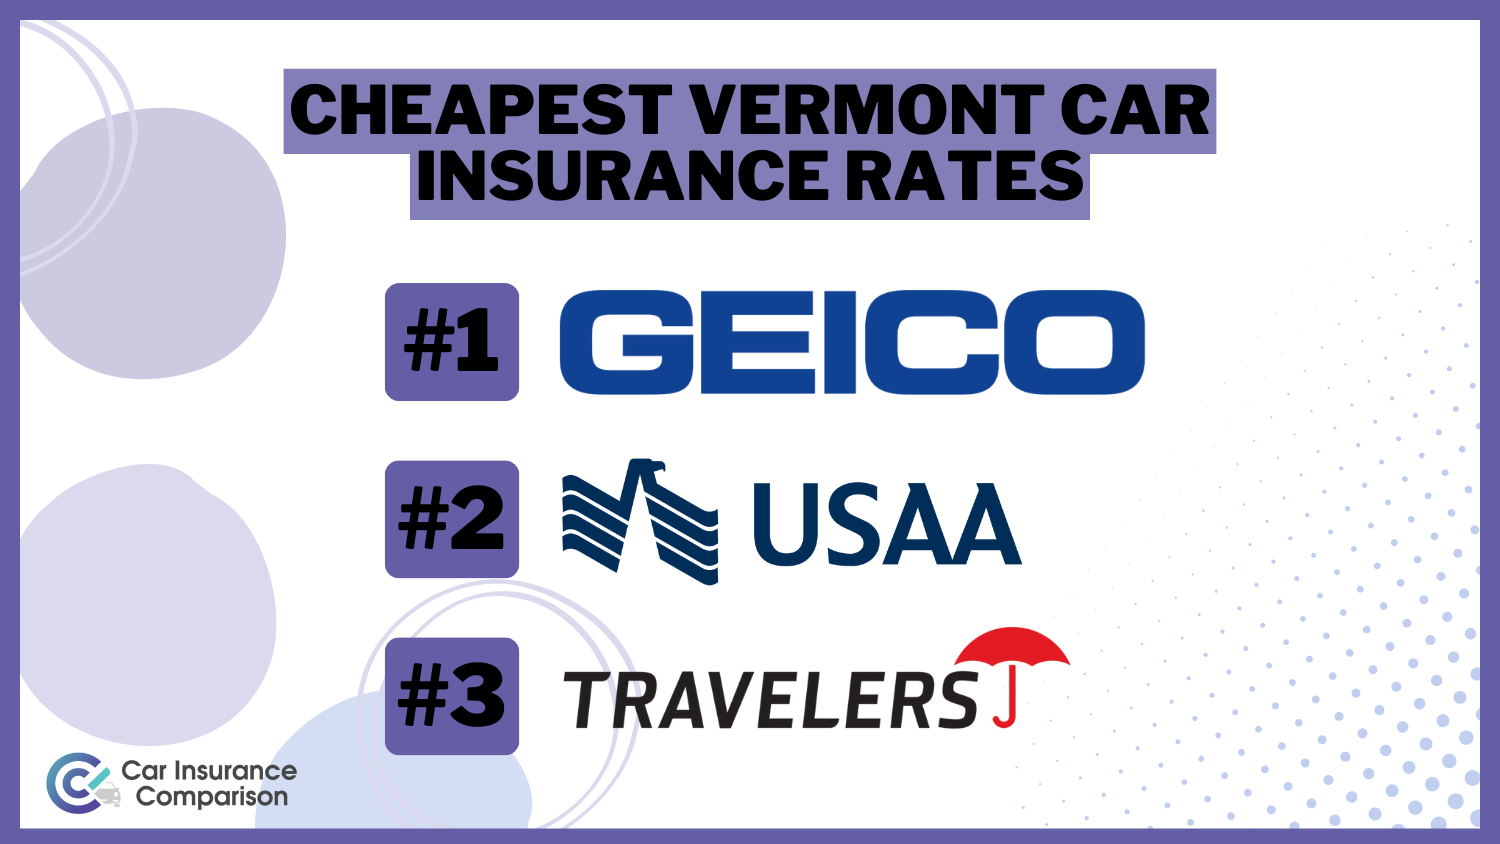 Cheapest Vermont Car Insurance Rates: Geico, USAA, Travelers